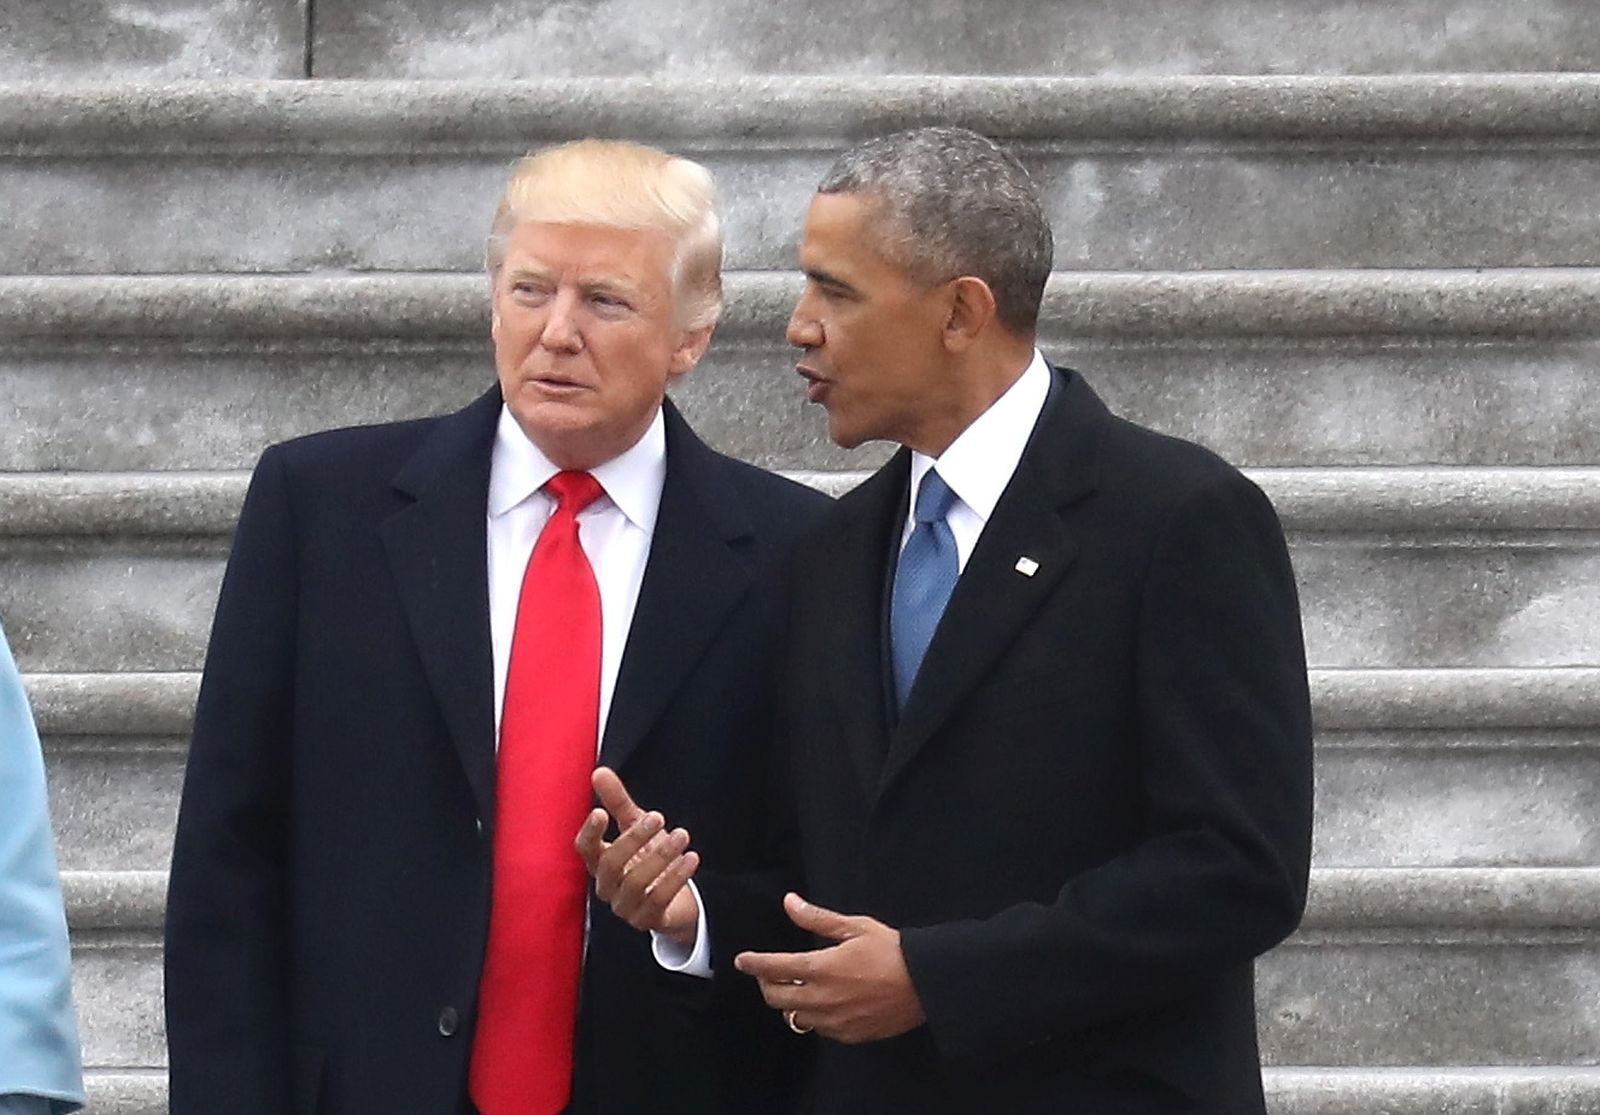 epa08939585 (FILE) US President Donald J. Trump (2ndL) and former US president Barack Obama (2ndR) stand on the steps of the  U.S. Capitol with First Lady Melania Trump (L) and Michelle Obama (R) in Washington, DC, USA, 20 January 2017. Trump won the 08 November 2016 election to become US President. The presidency of Donald Trump, which records two presidential impeachments, will end at noon on 20 January 2021.  EPA/Rob Carr / POOL *** Local Caption *** 53263220